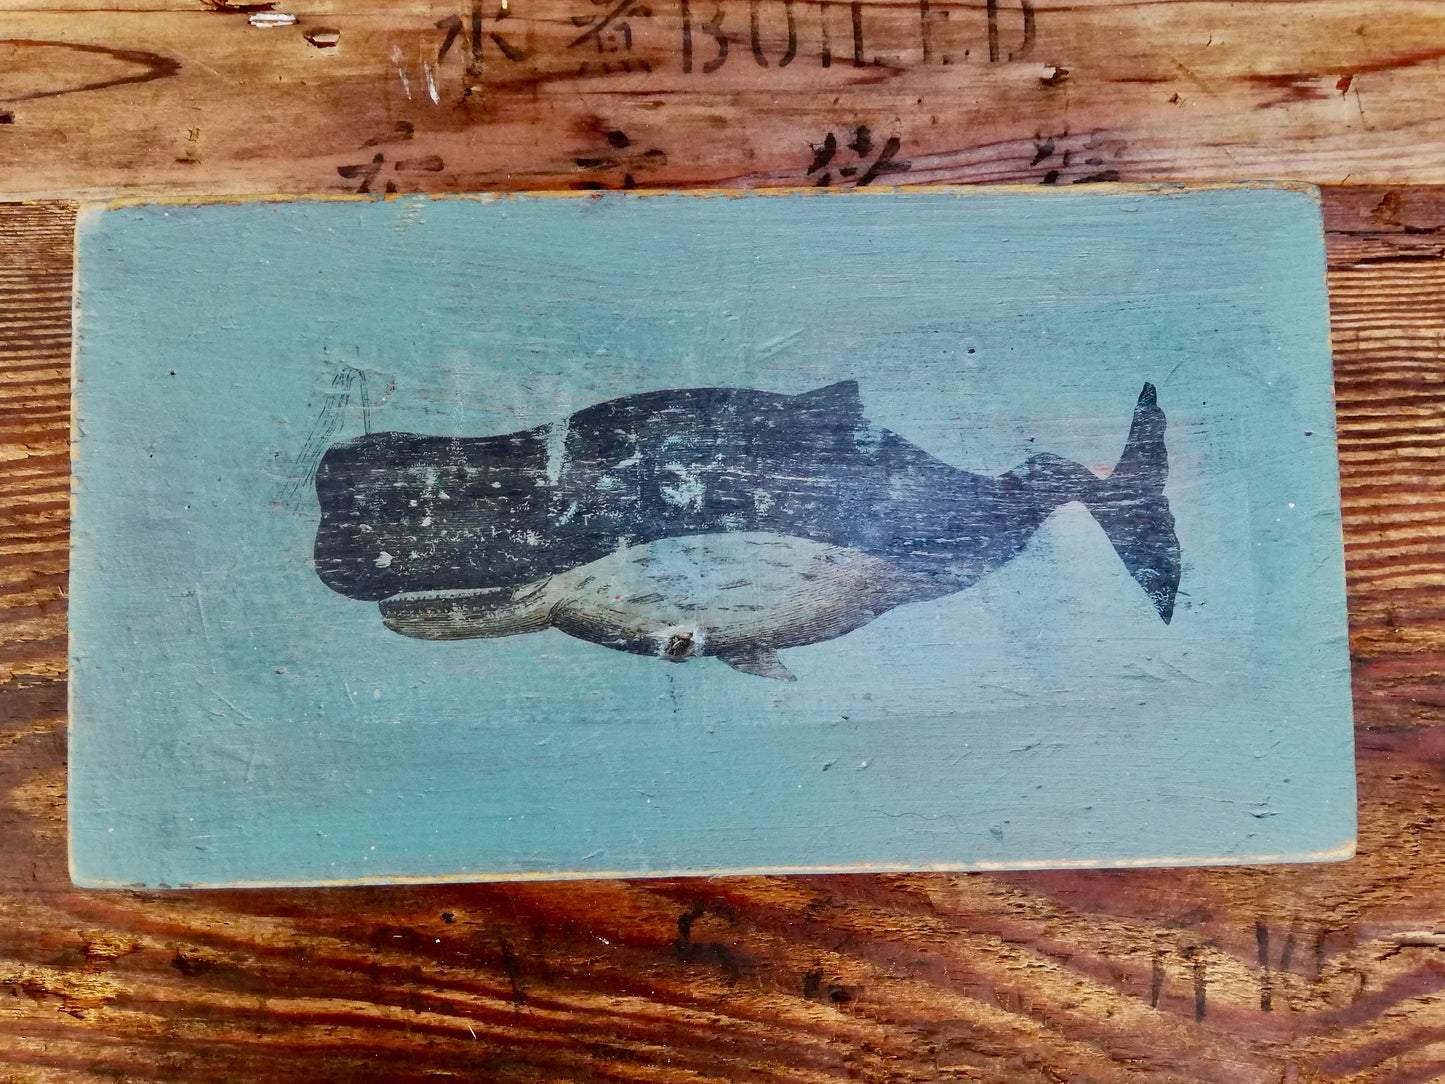 Vintage wooden box with whale design